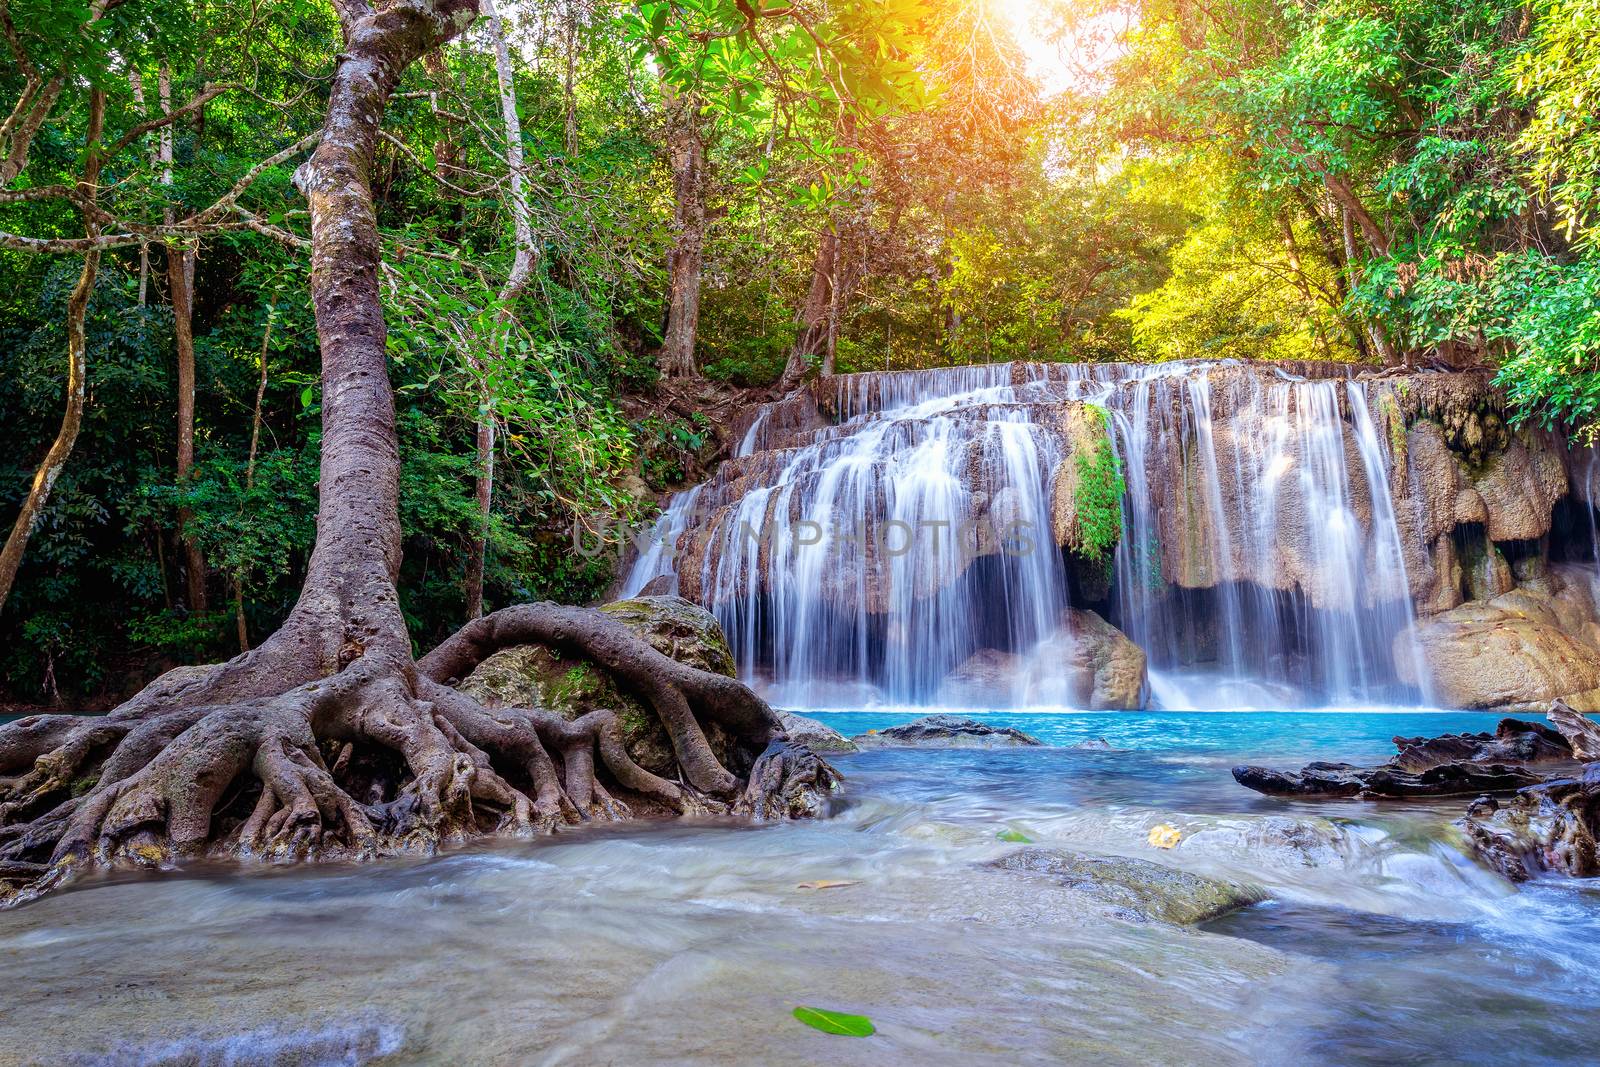 Erawan waterfall in Thailand. Beautiful waterfall with emerald pool in nature. by gutarphotoghaphy